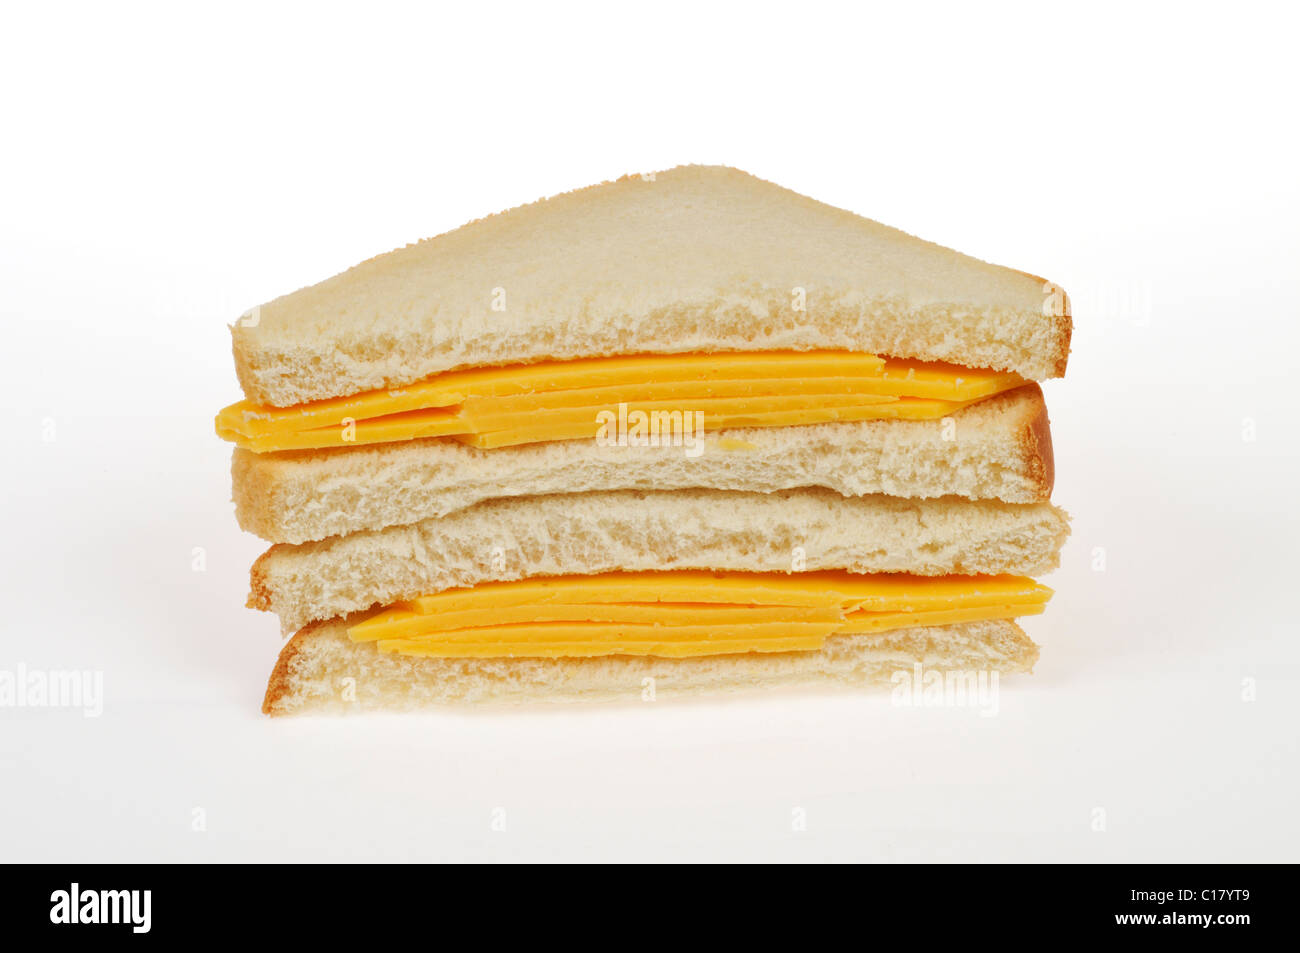 Cheese sandwich with  slices of yellow cheese on white bread cut in half stacked on white background, cutout. Stock Photo